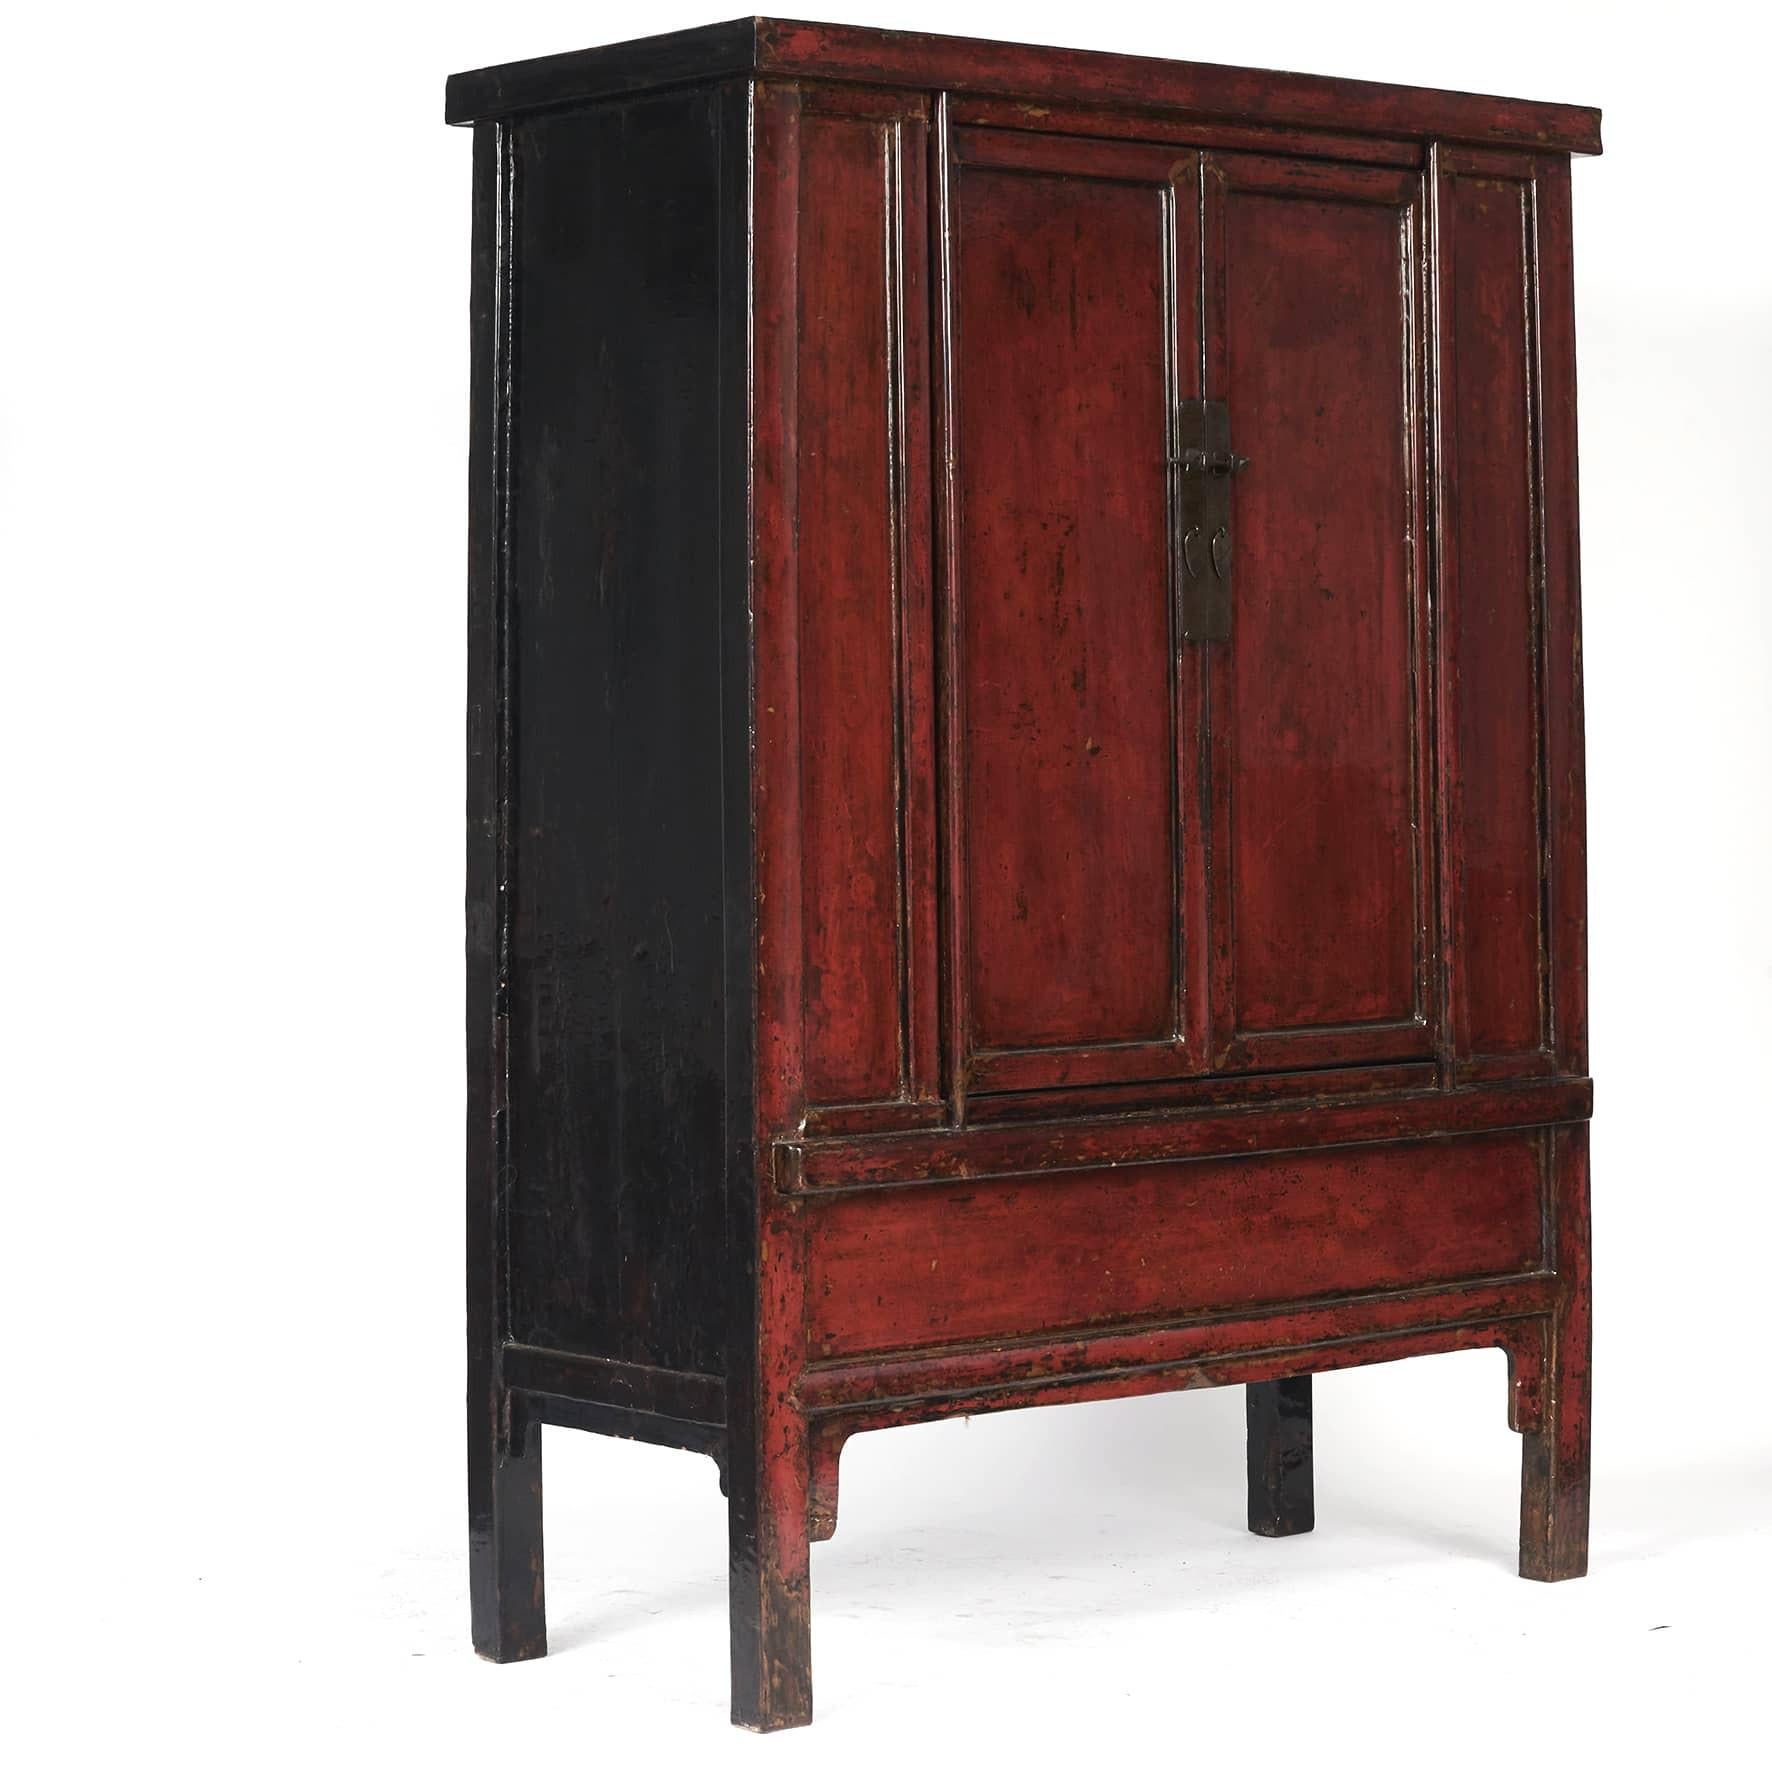 Cabinet with original thick lacquer.
Beautiful red lacquer front with remnants of decoration can be seen in the silhouette. Black lacquer on the sides.
The lacquer colors are beautiful with a good depth.
Pair of doors, behind which